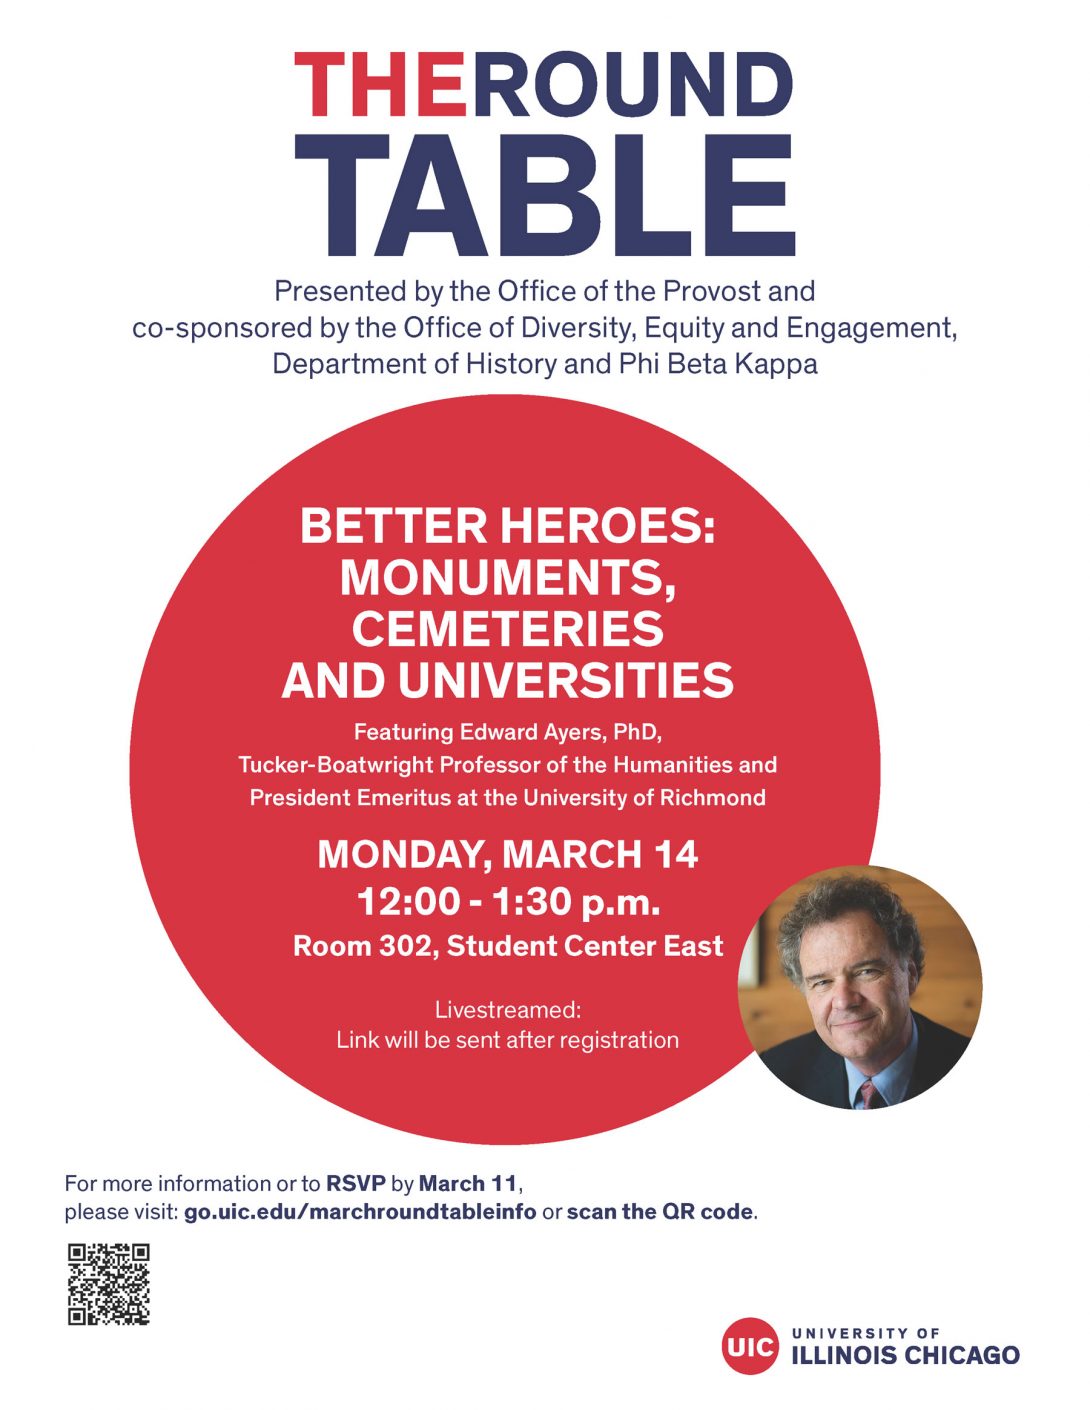 The Roundtable: Better Heroes: Monuments, Cemeteries, and Universities, Monday, March 14, 12-1:30 pm, Room 302, Student Center East